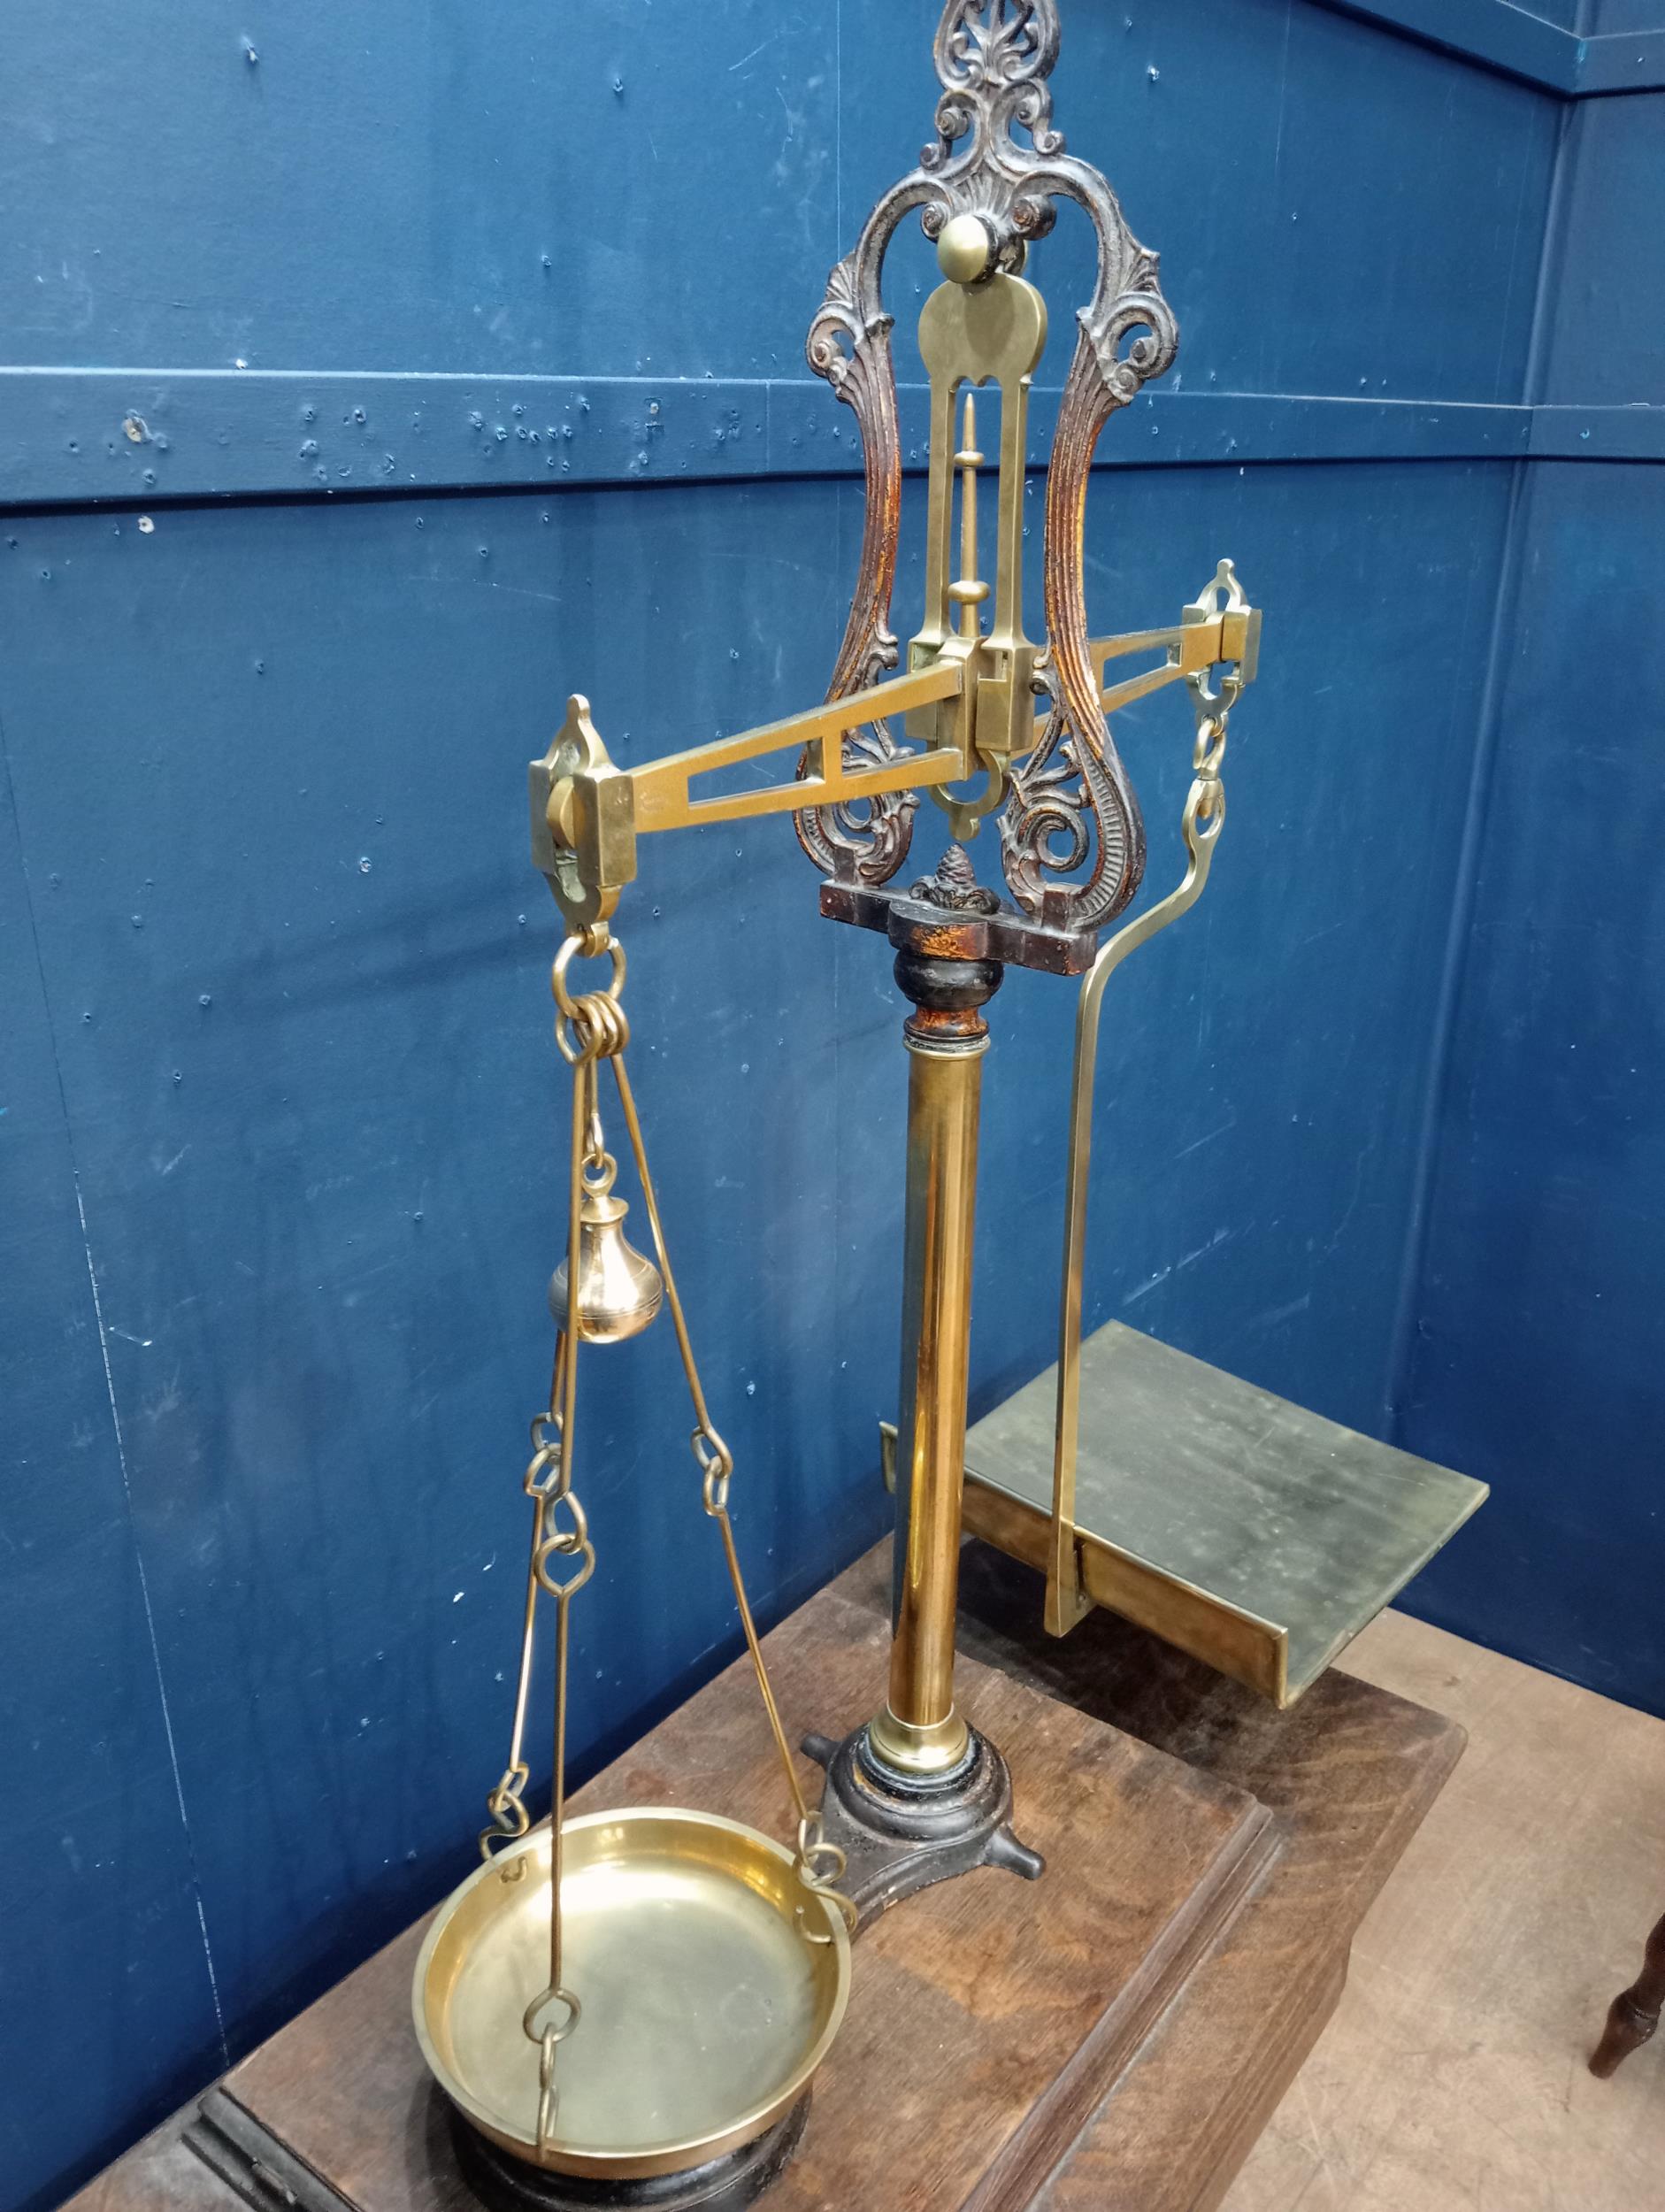 19th C. cast brass weighing scales {H 200cm x W 80cm x D 35cm }. - Image 2 of 3